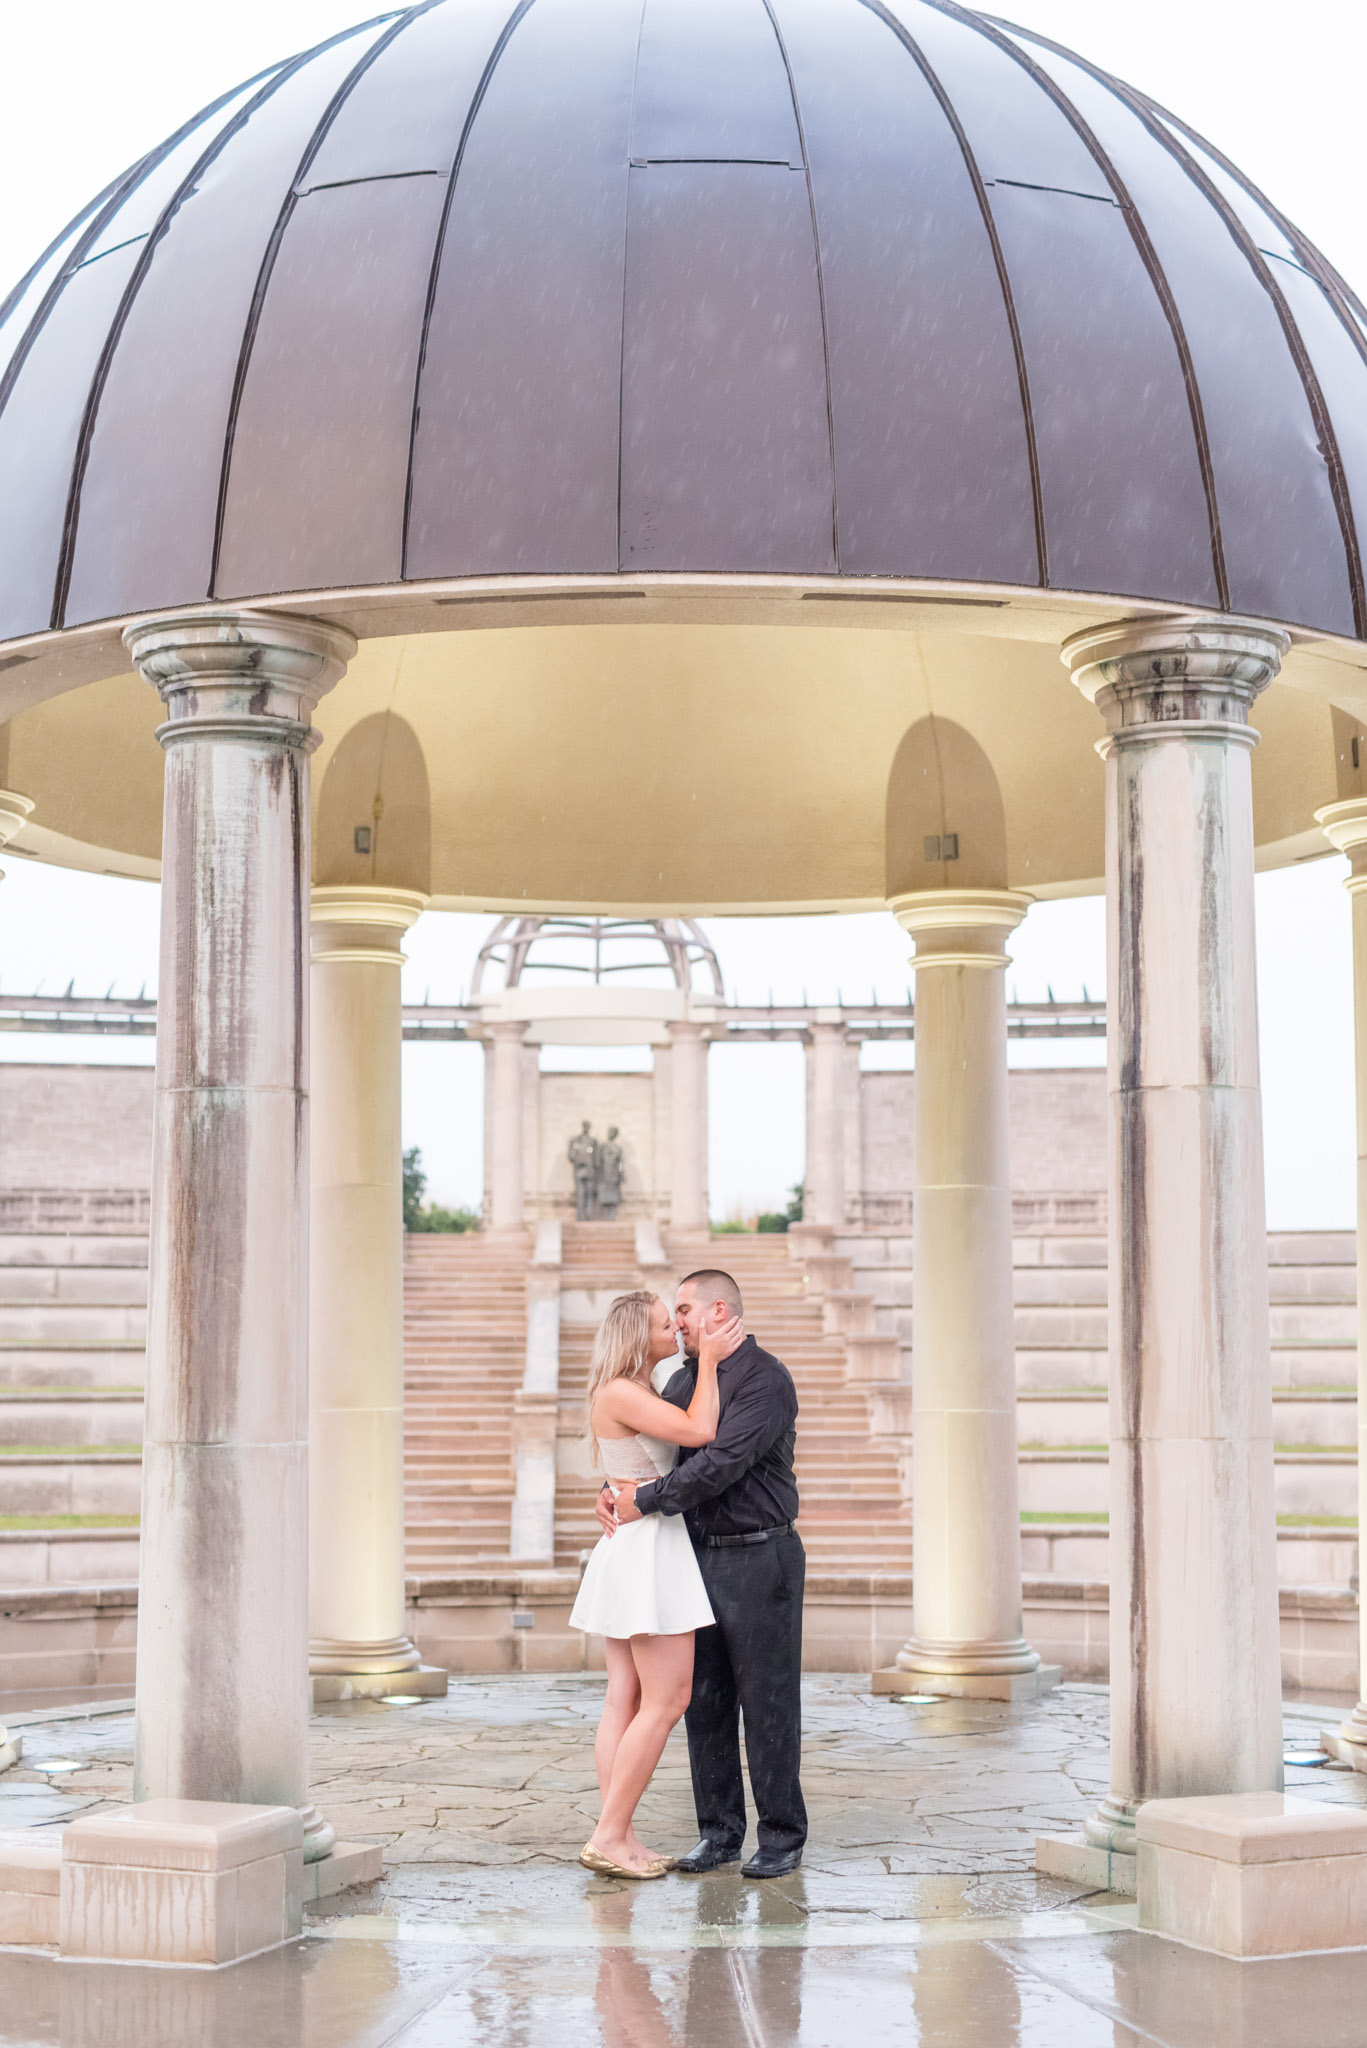 Engaged couple kiss while in ampitheatre.